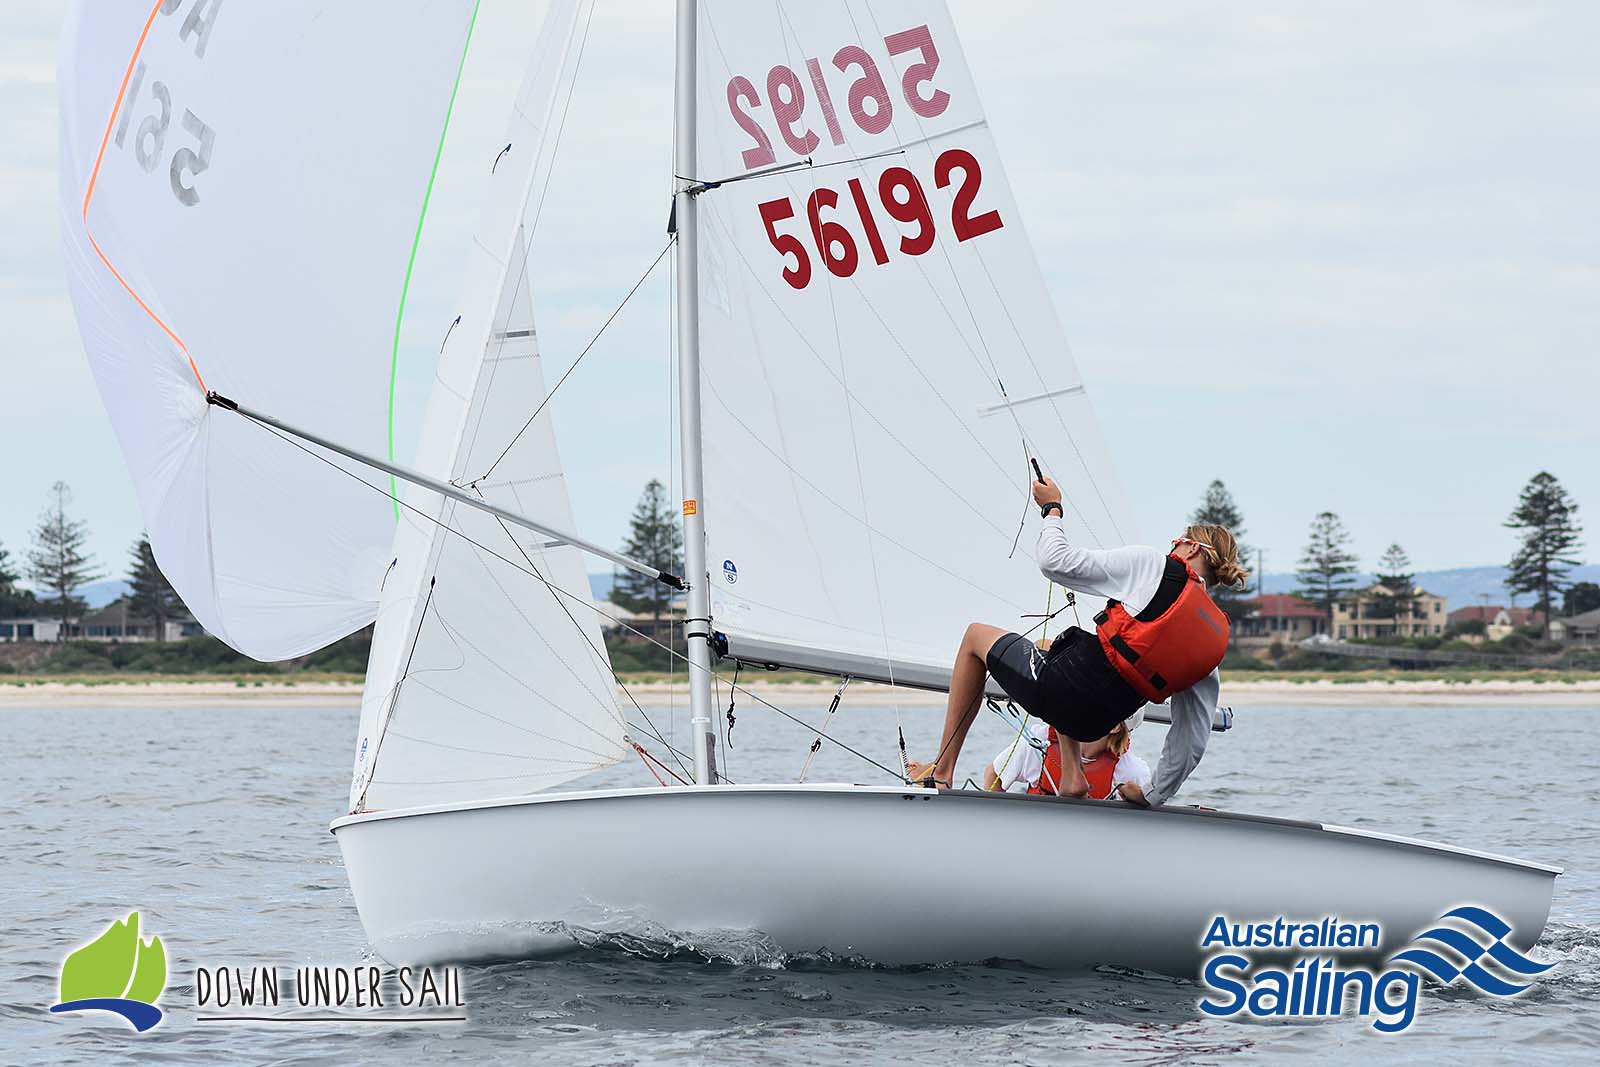 Matt Meaney and Sam Magarey were the overall winners in the 420 fleet.